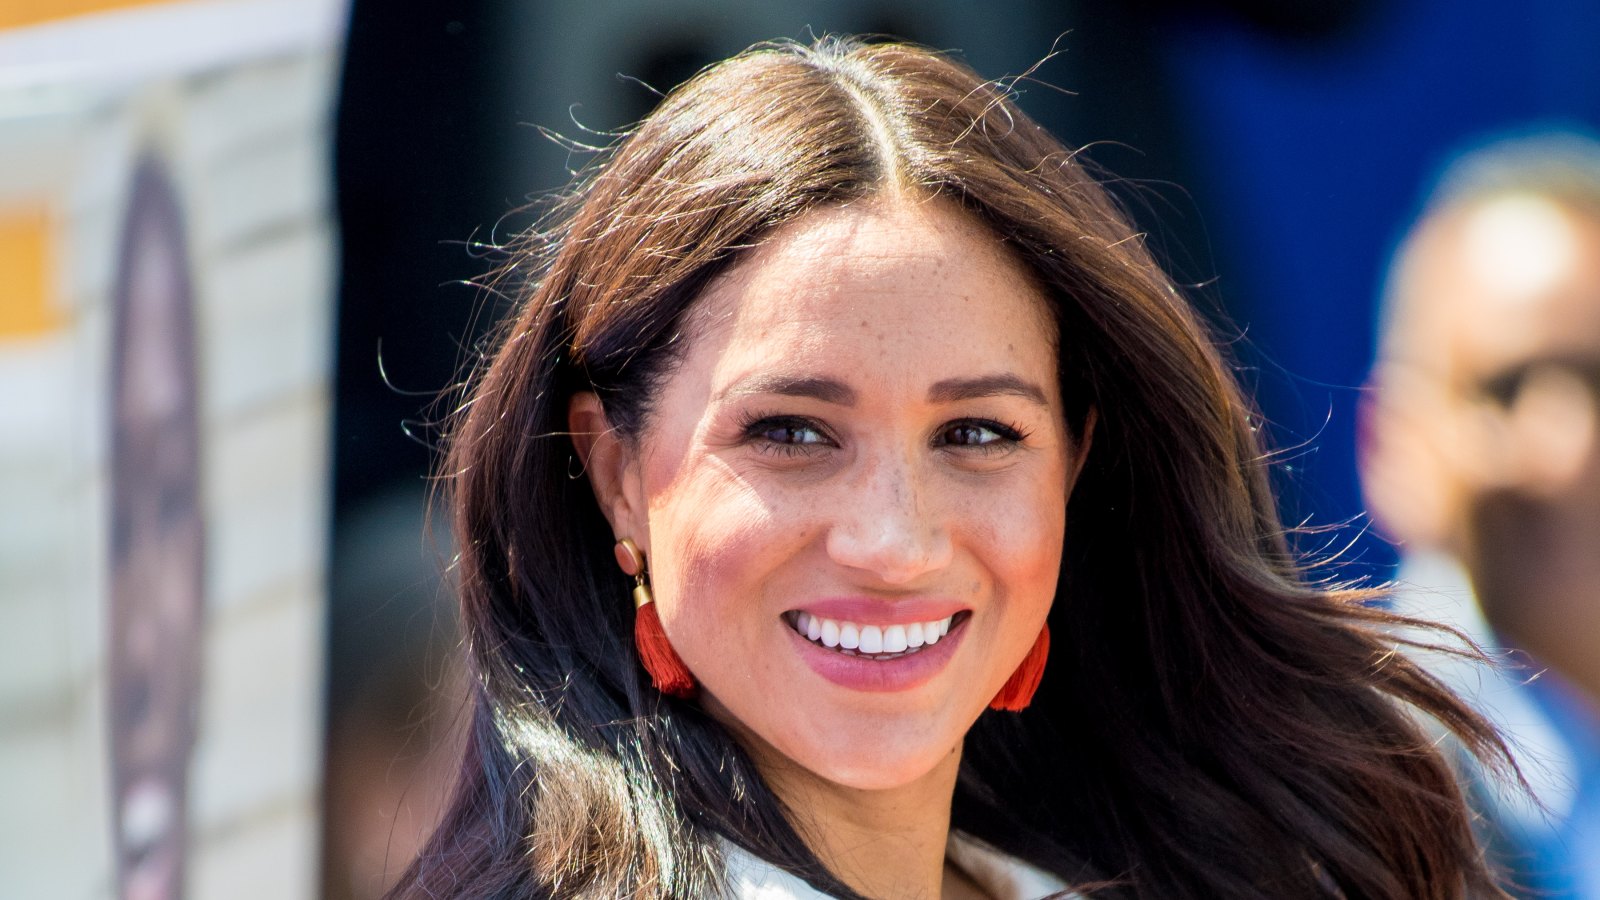 Meghan Markle during her visit to Africa in October, 2019.